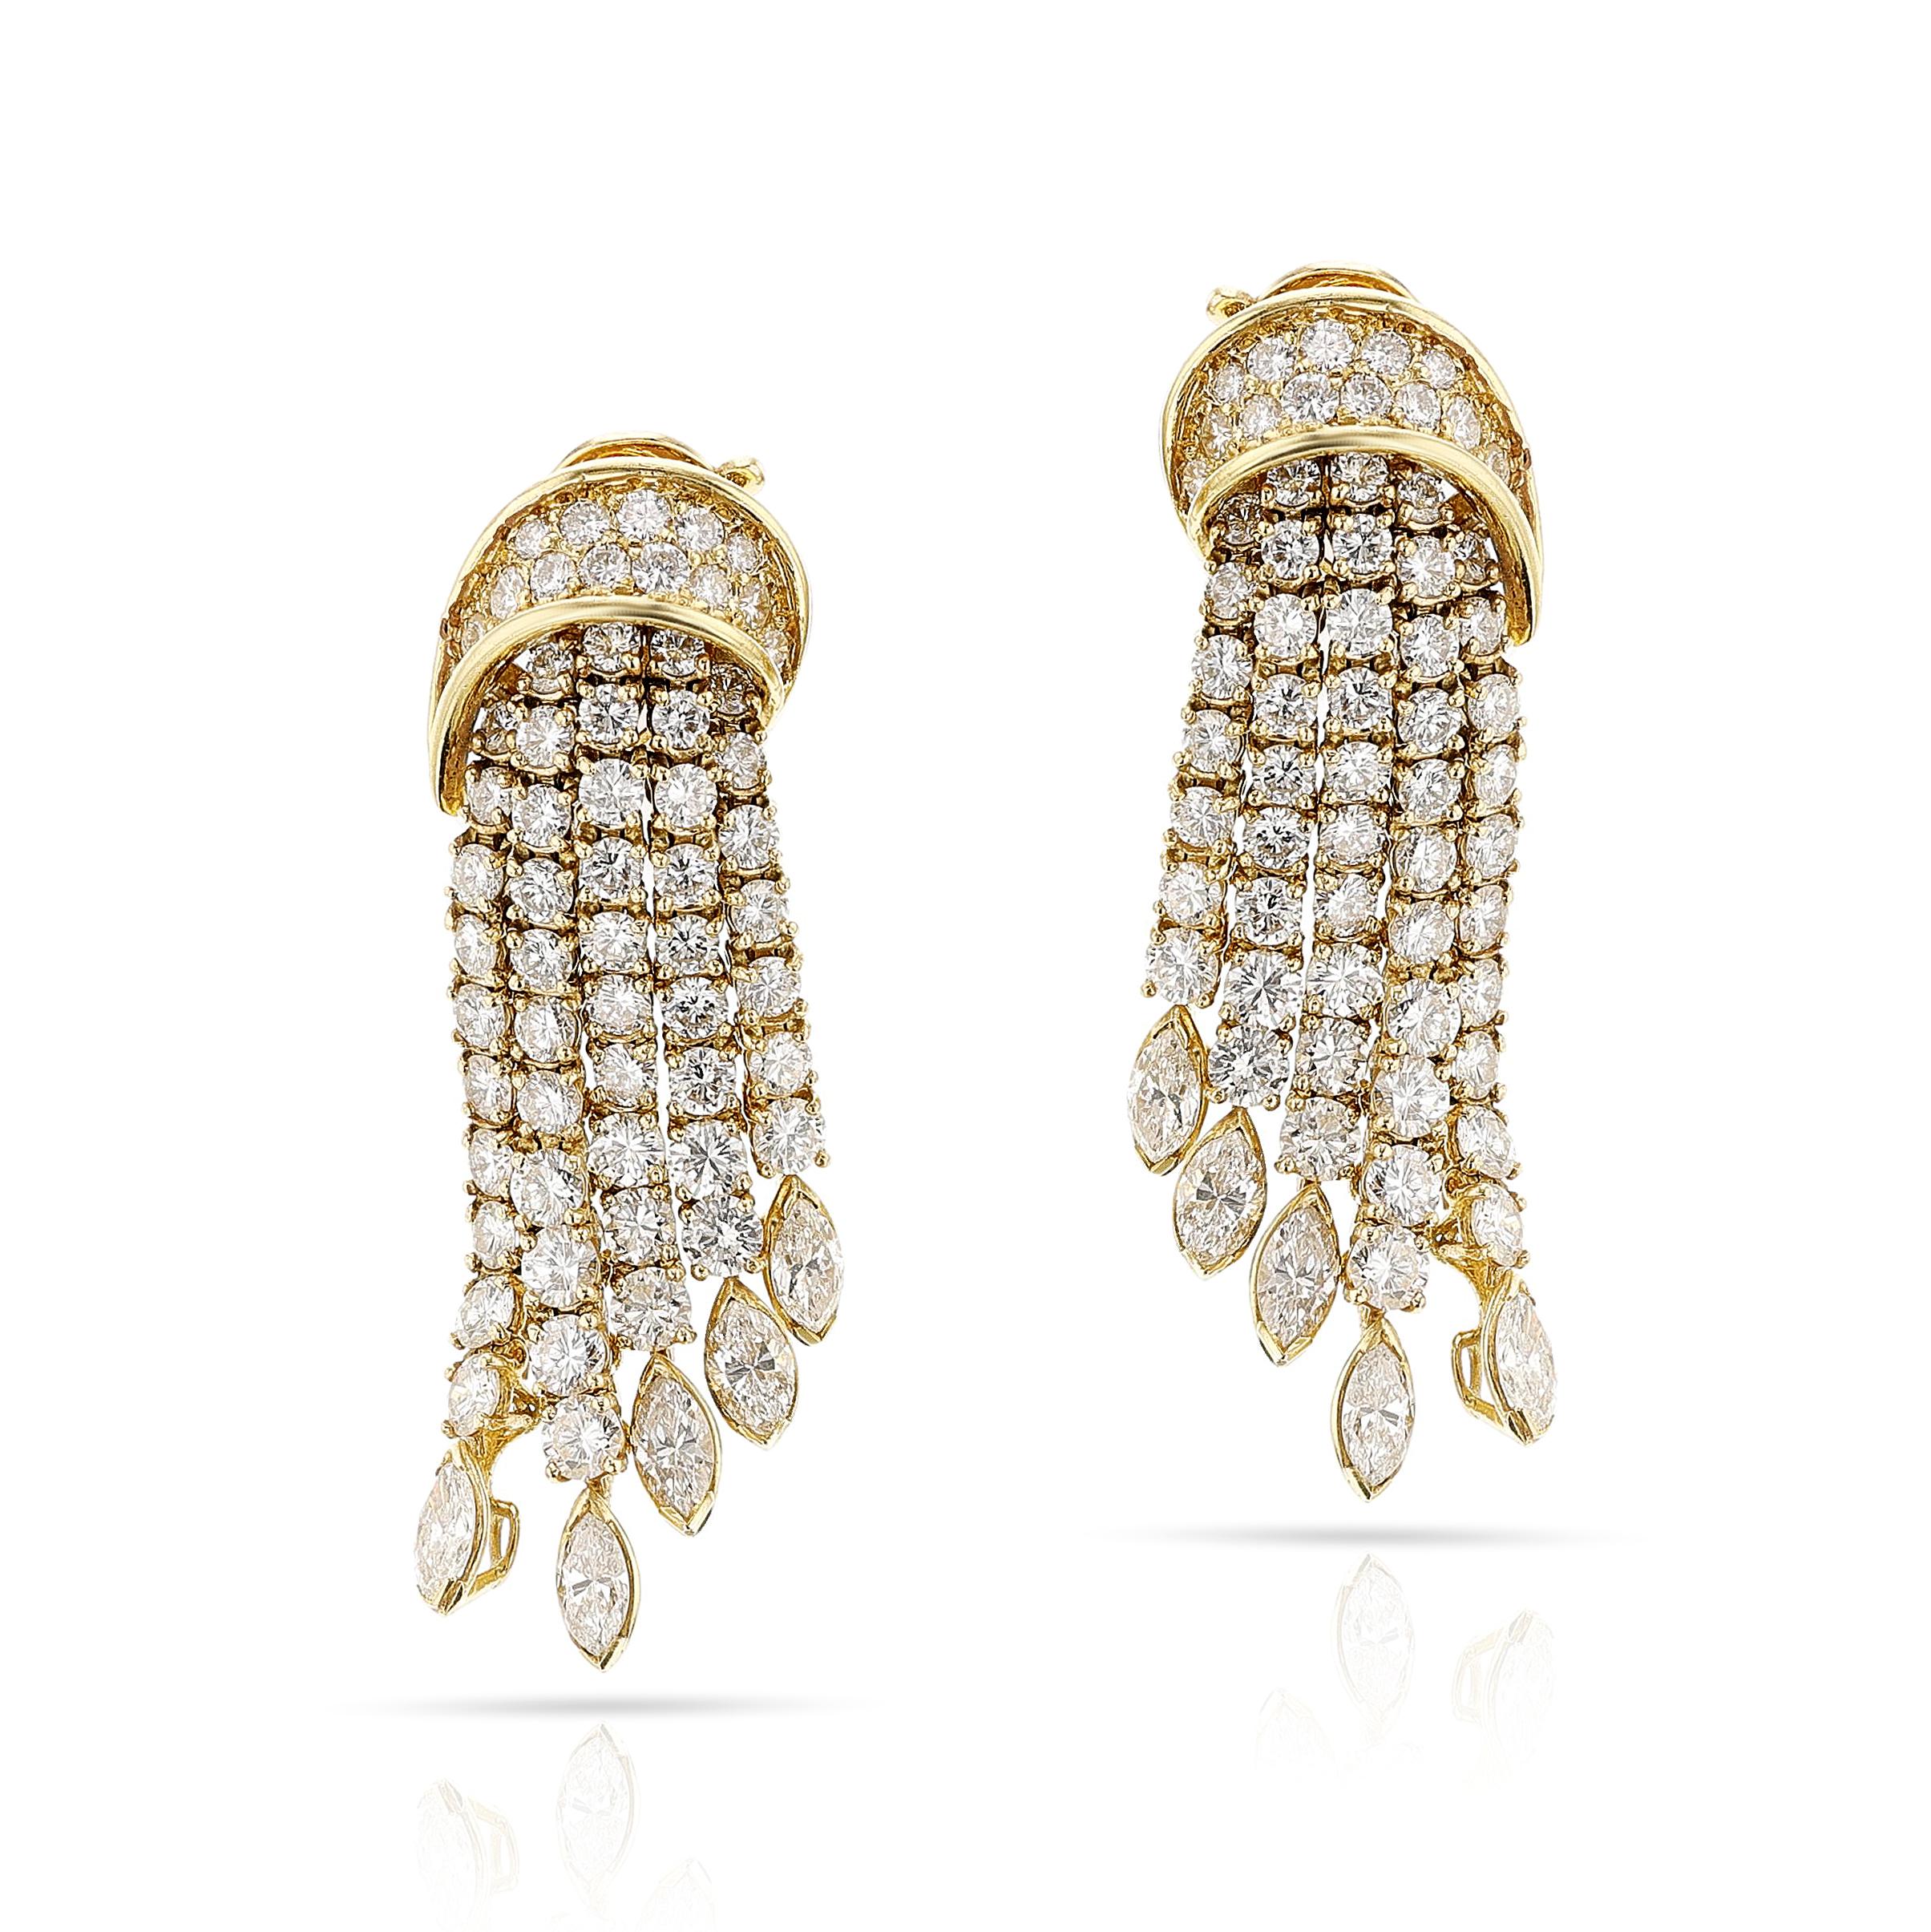 A pair of Fred Paris Diamond Dangling Earrings made in 18k yellow gold. The total diamond weight is appx. 11 carats, G-H color and VS2/SI1 clarity. Signed Fred Paris France, with maker's marks and French assay marks. The total weight is 27.43 grams